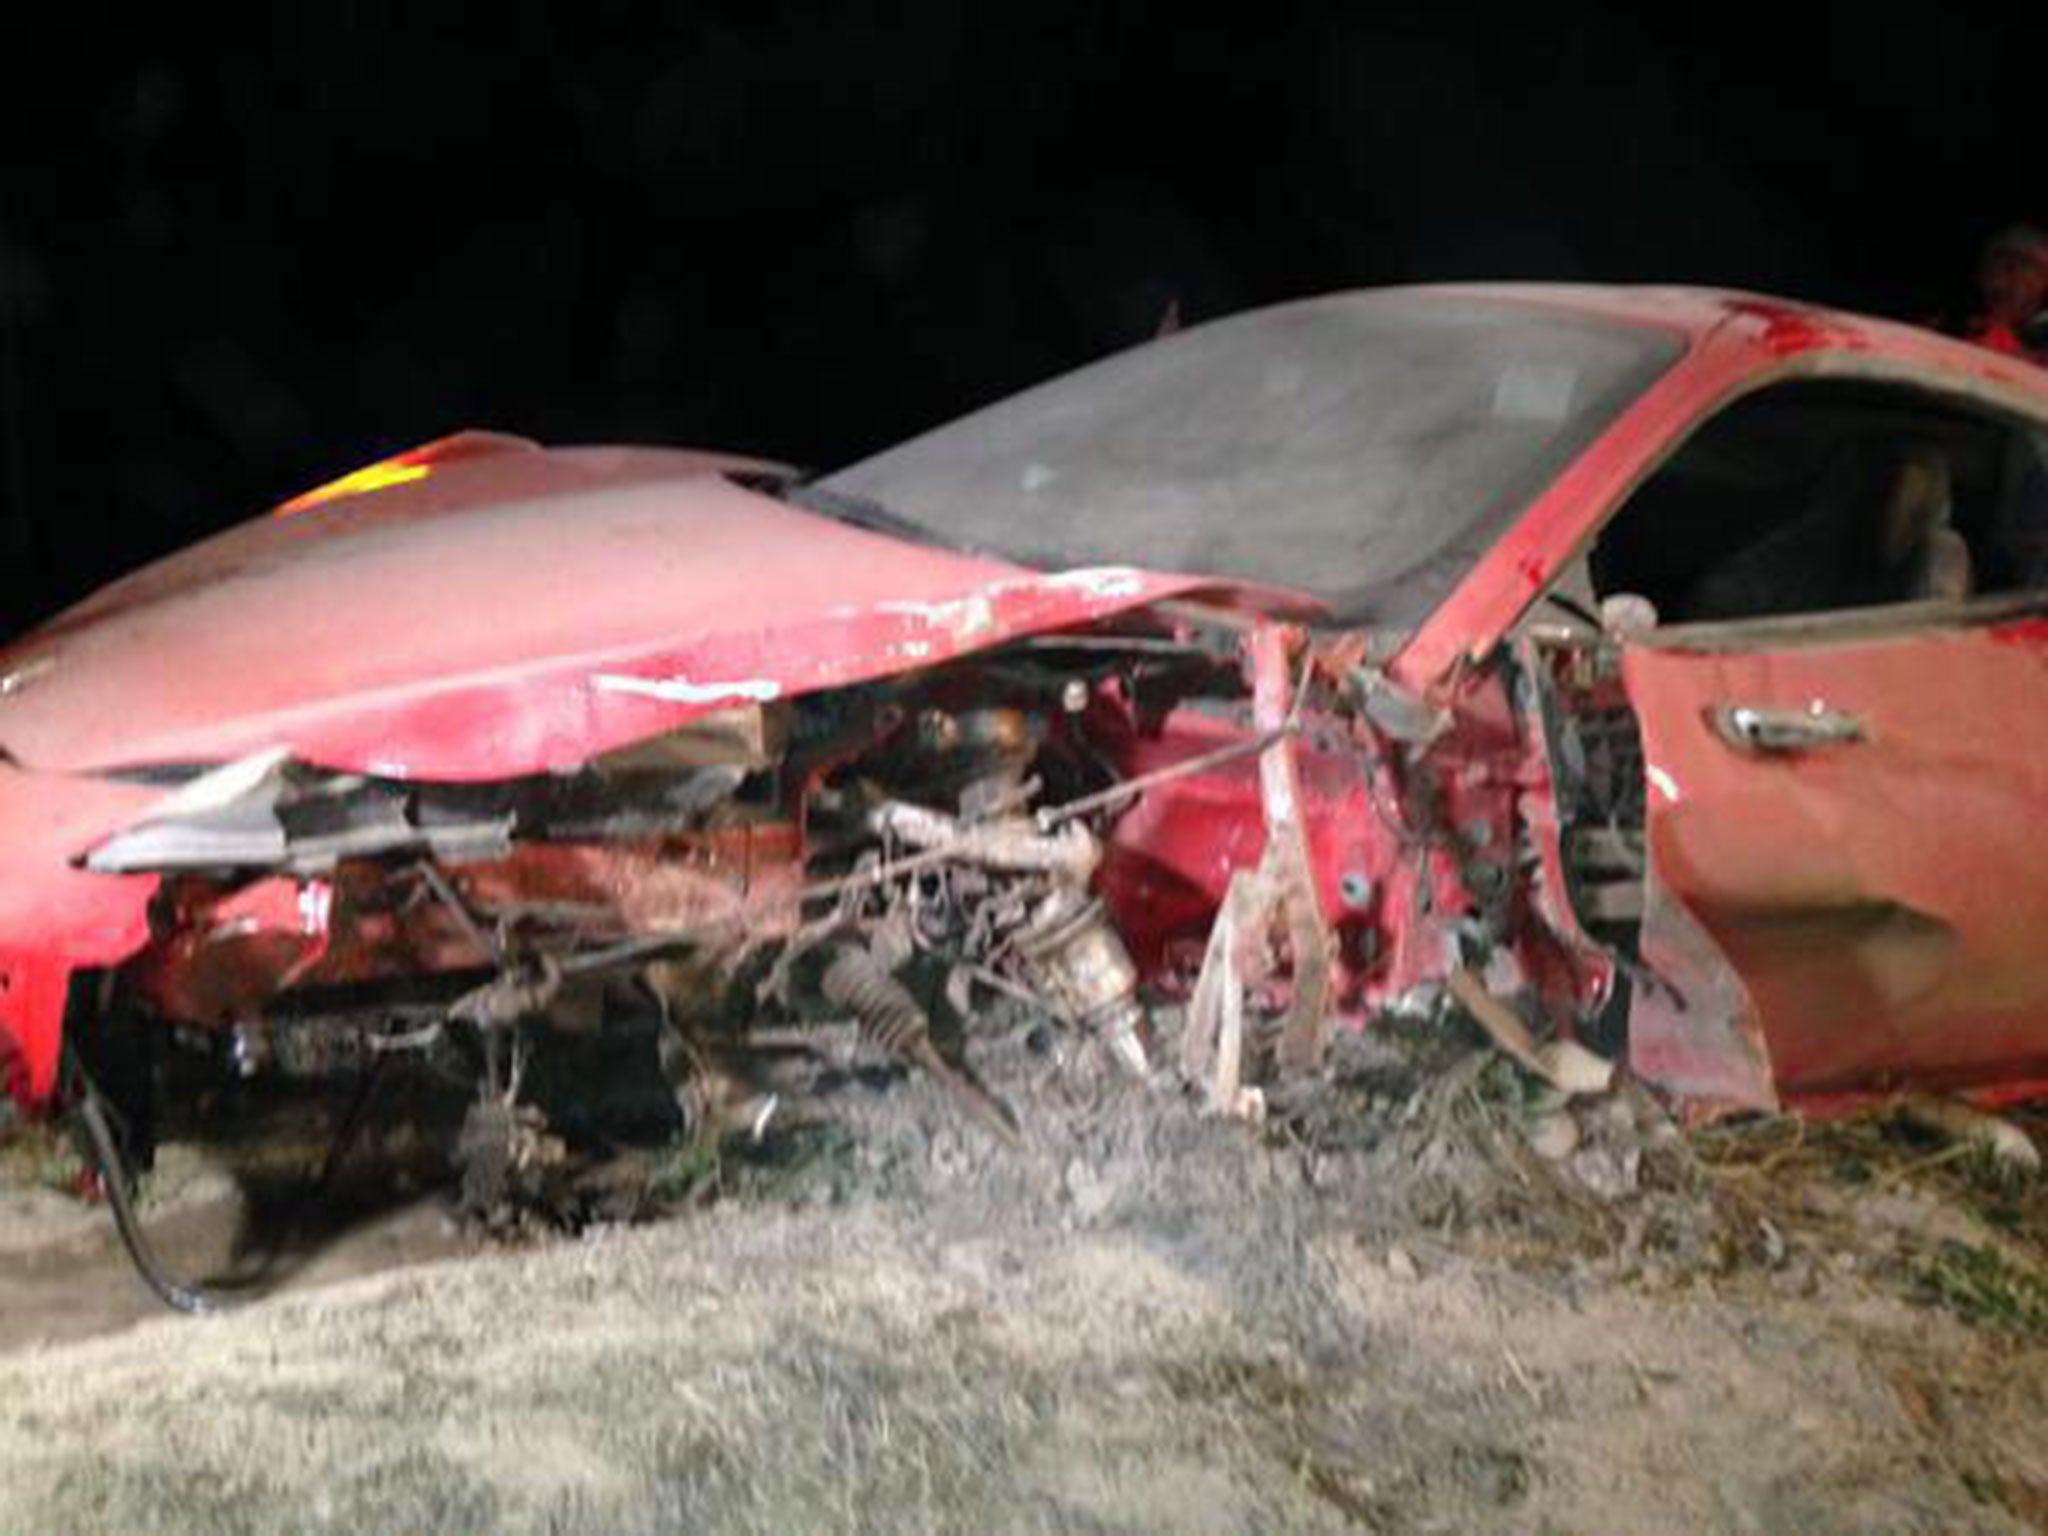 Vidal's Ferrari suffered extensive damage in the accident